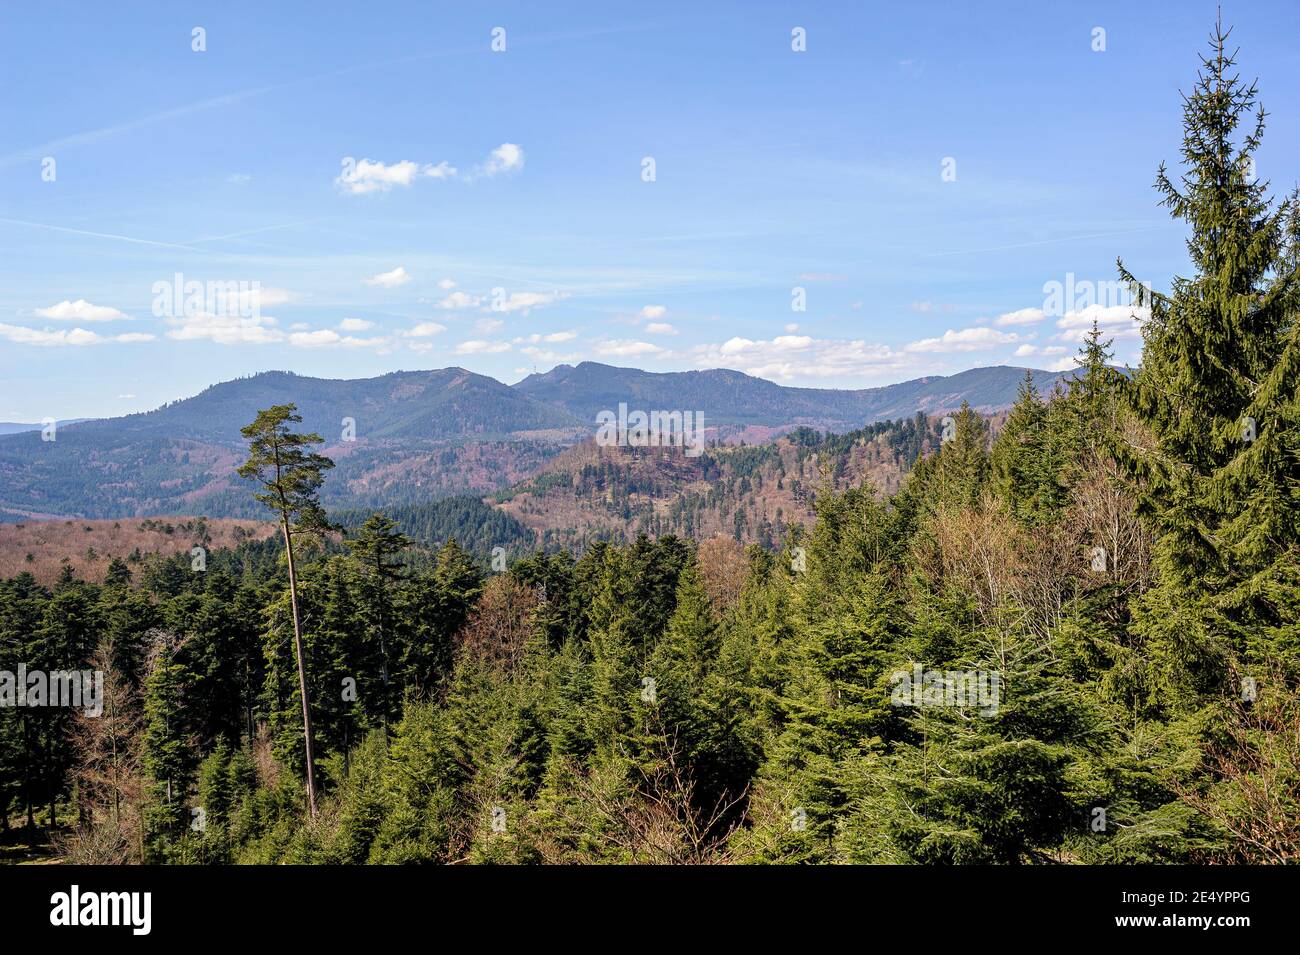 Morning view of the Vosges mountains. The fir trees in the foreground contrast with the still bare trees. The sky is blue with some clouds. Stock Photo